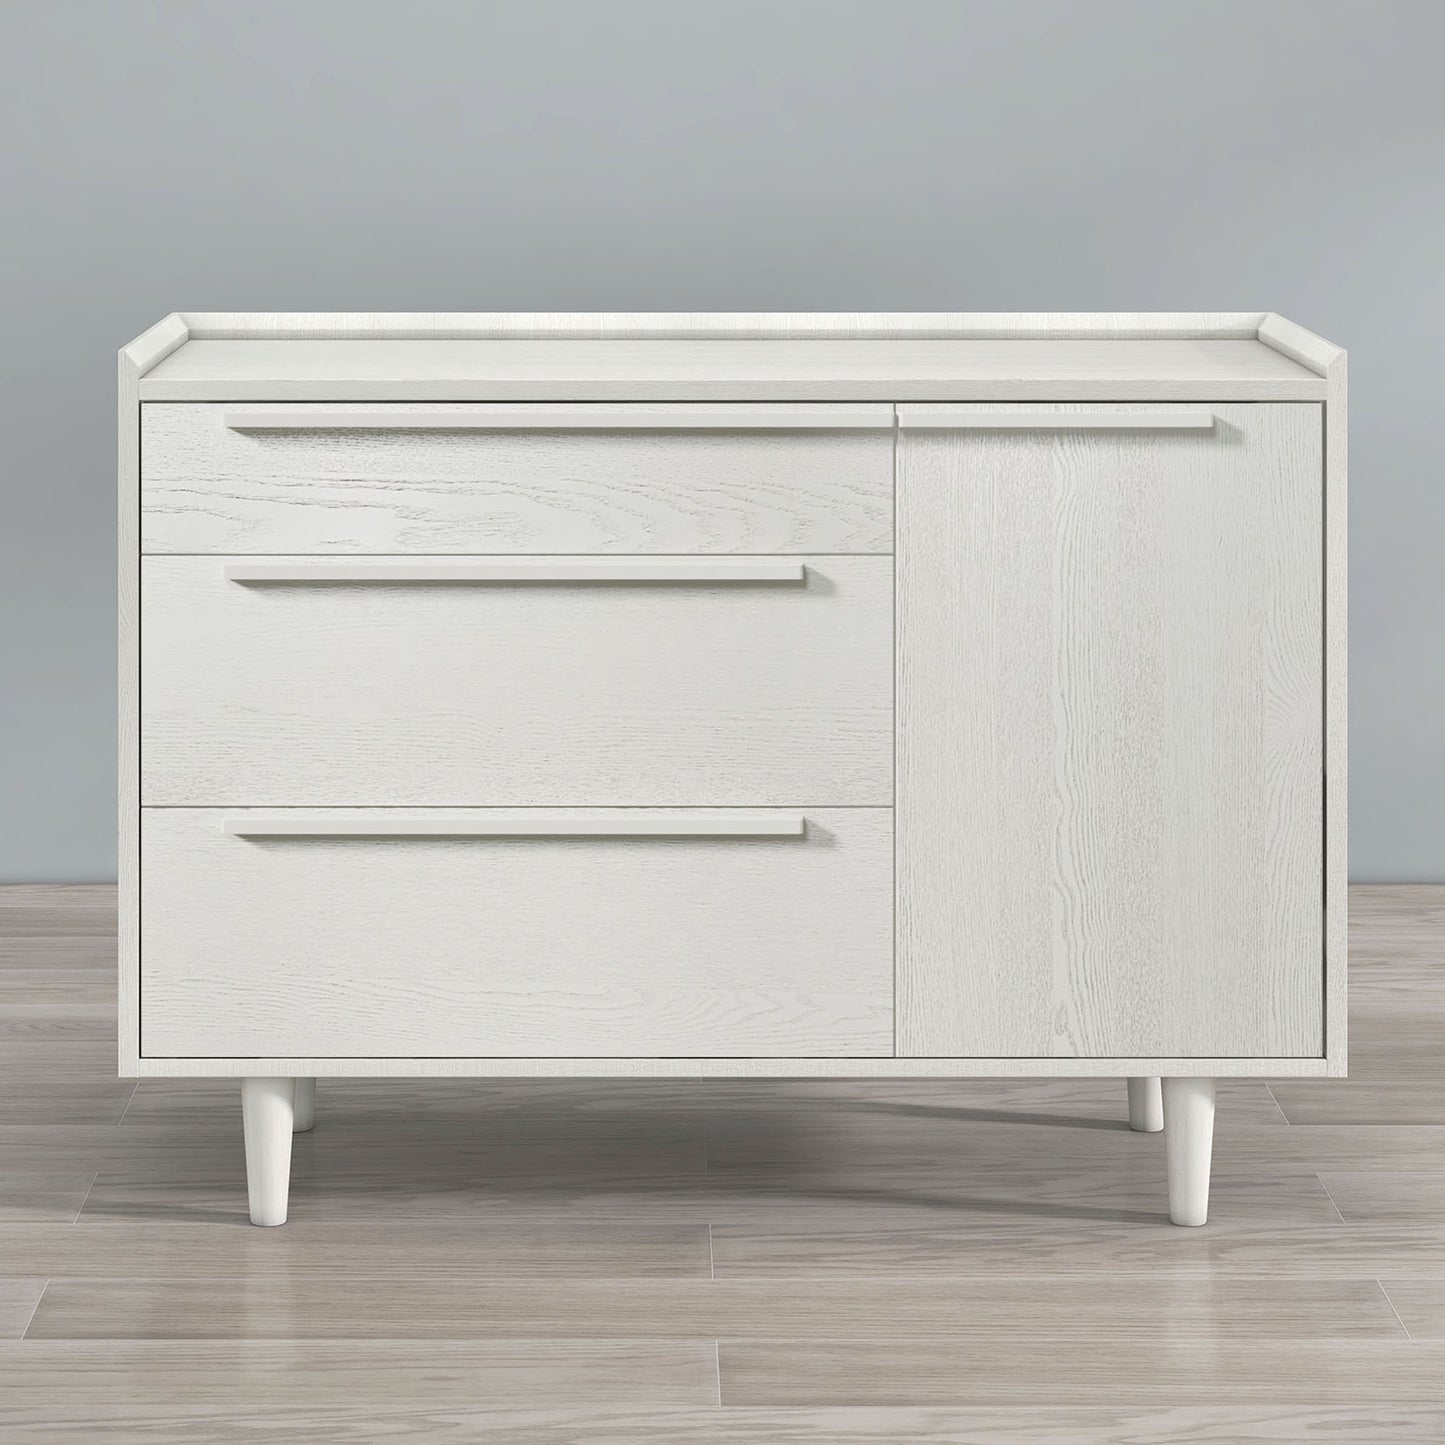 Modern Wood Grain Sideboard with 3 Drawers Storage Cabinet Entryway Floor Cabinet Sideboard Dresser with Solid Wood Legs for bedroom and living room , Grain White